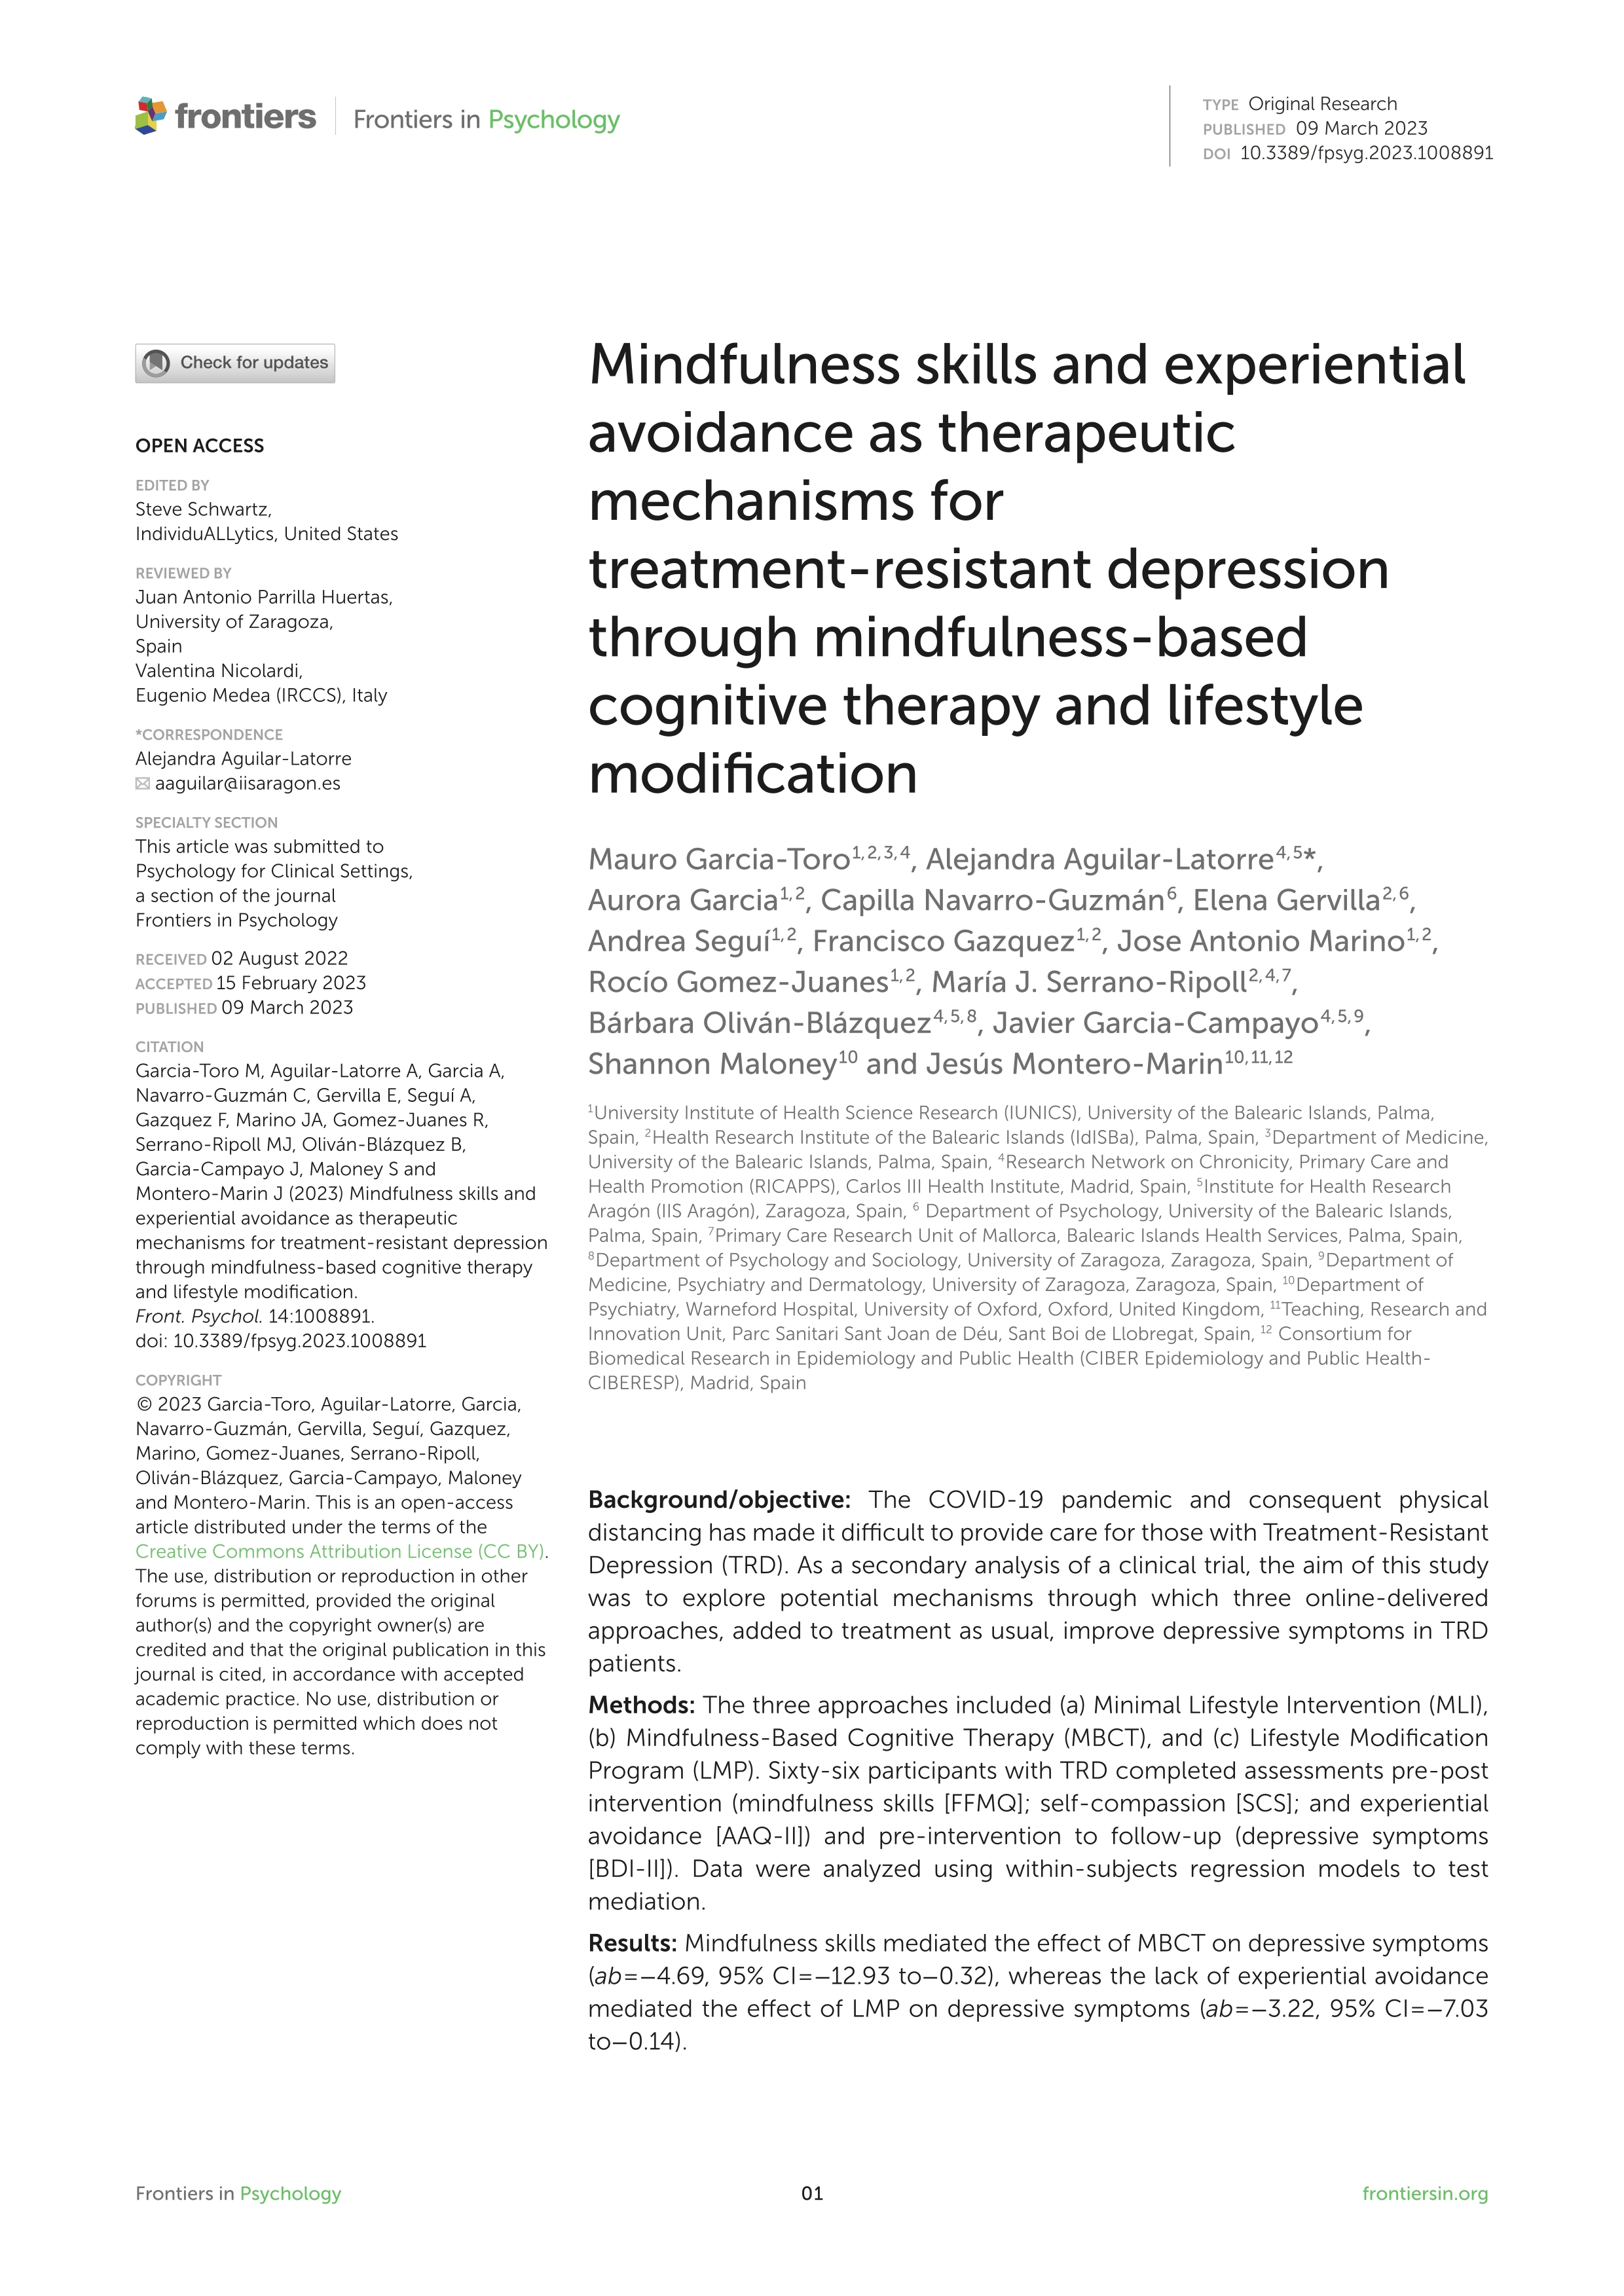 Mindfulness skills and experiential avoidance as therapeutic mechanisms for treatment-resistant depression through mindfulness-based cognitive therapy and lifestyle modification